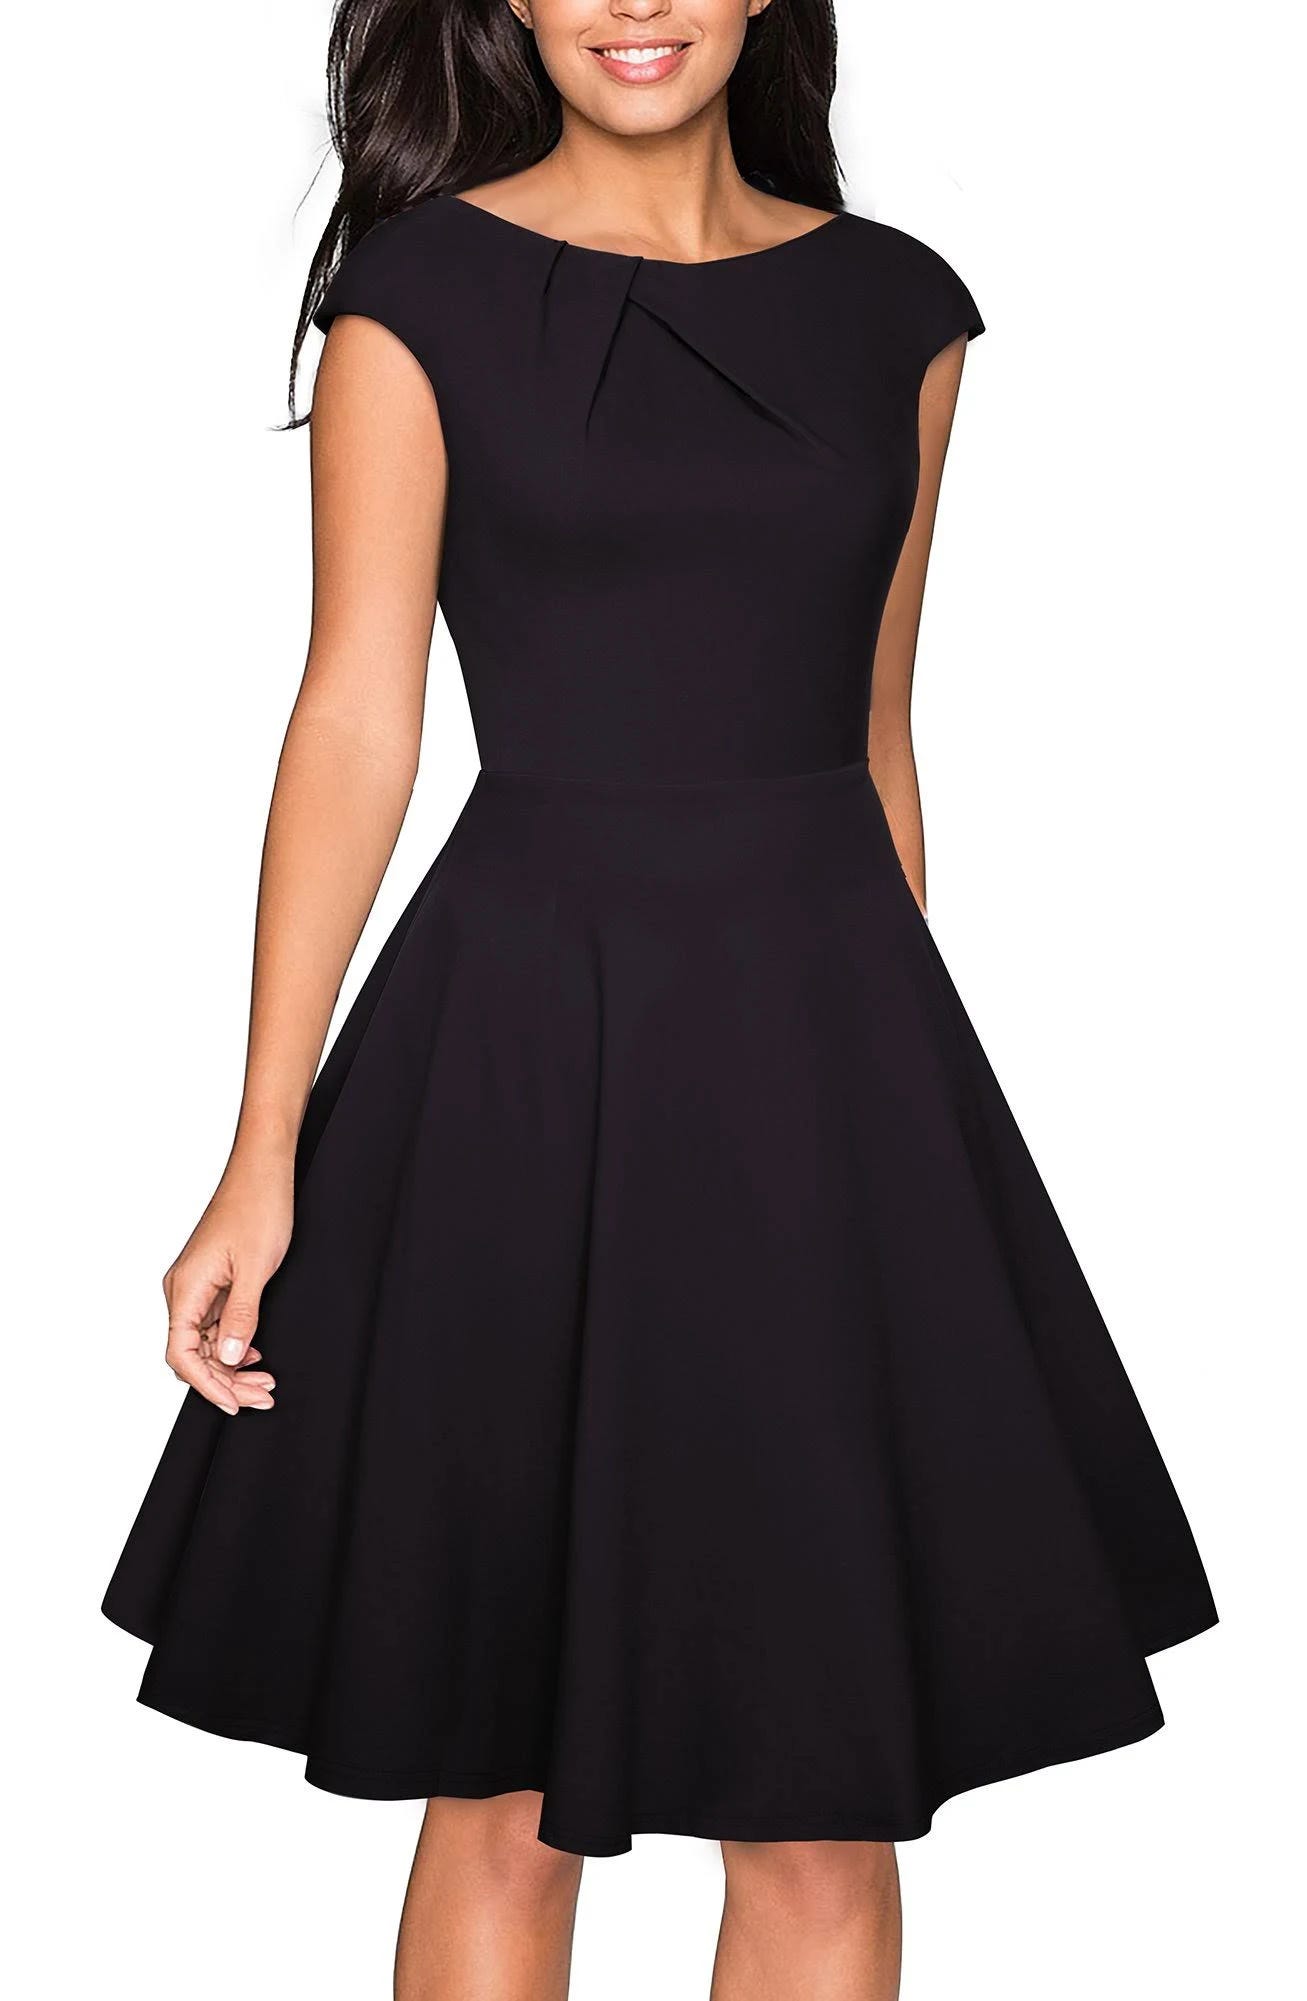 Vintage Elegant 1950s Scoop Neck Dress - Perfect for Casual Occasions | Image